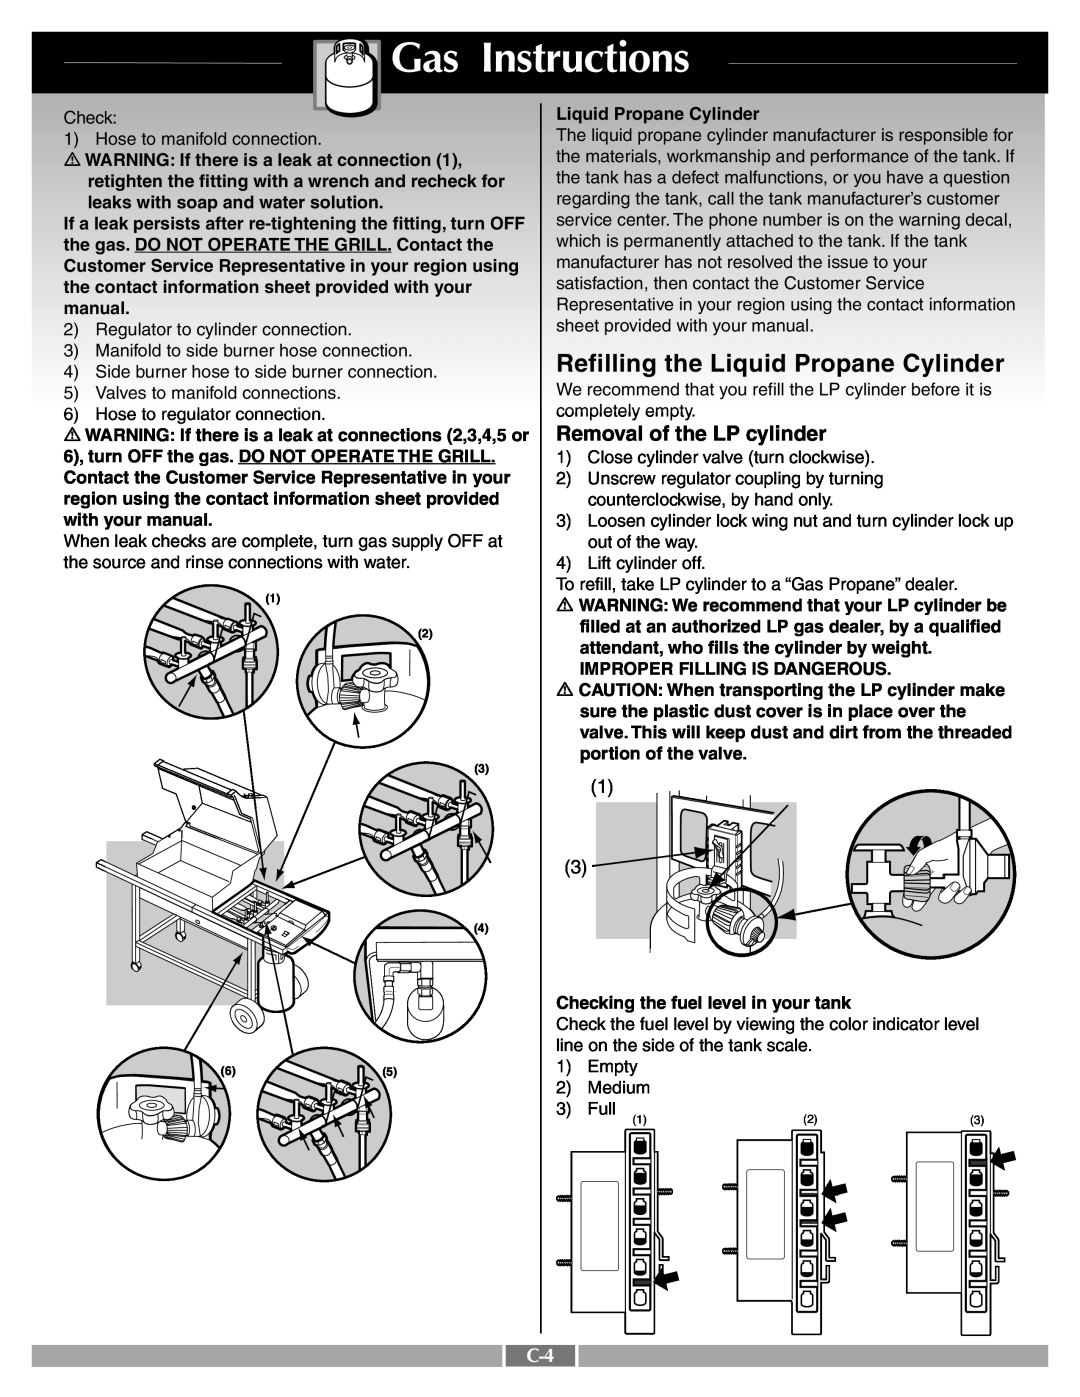 Weber 55249 manual Refilling the Liquid Propane Cylinder, Removal of the LP cylinder, Gas Instructions 